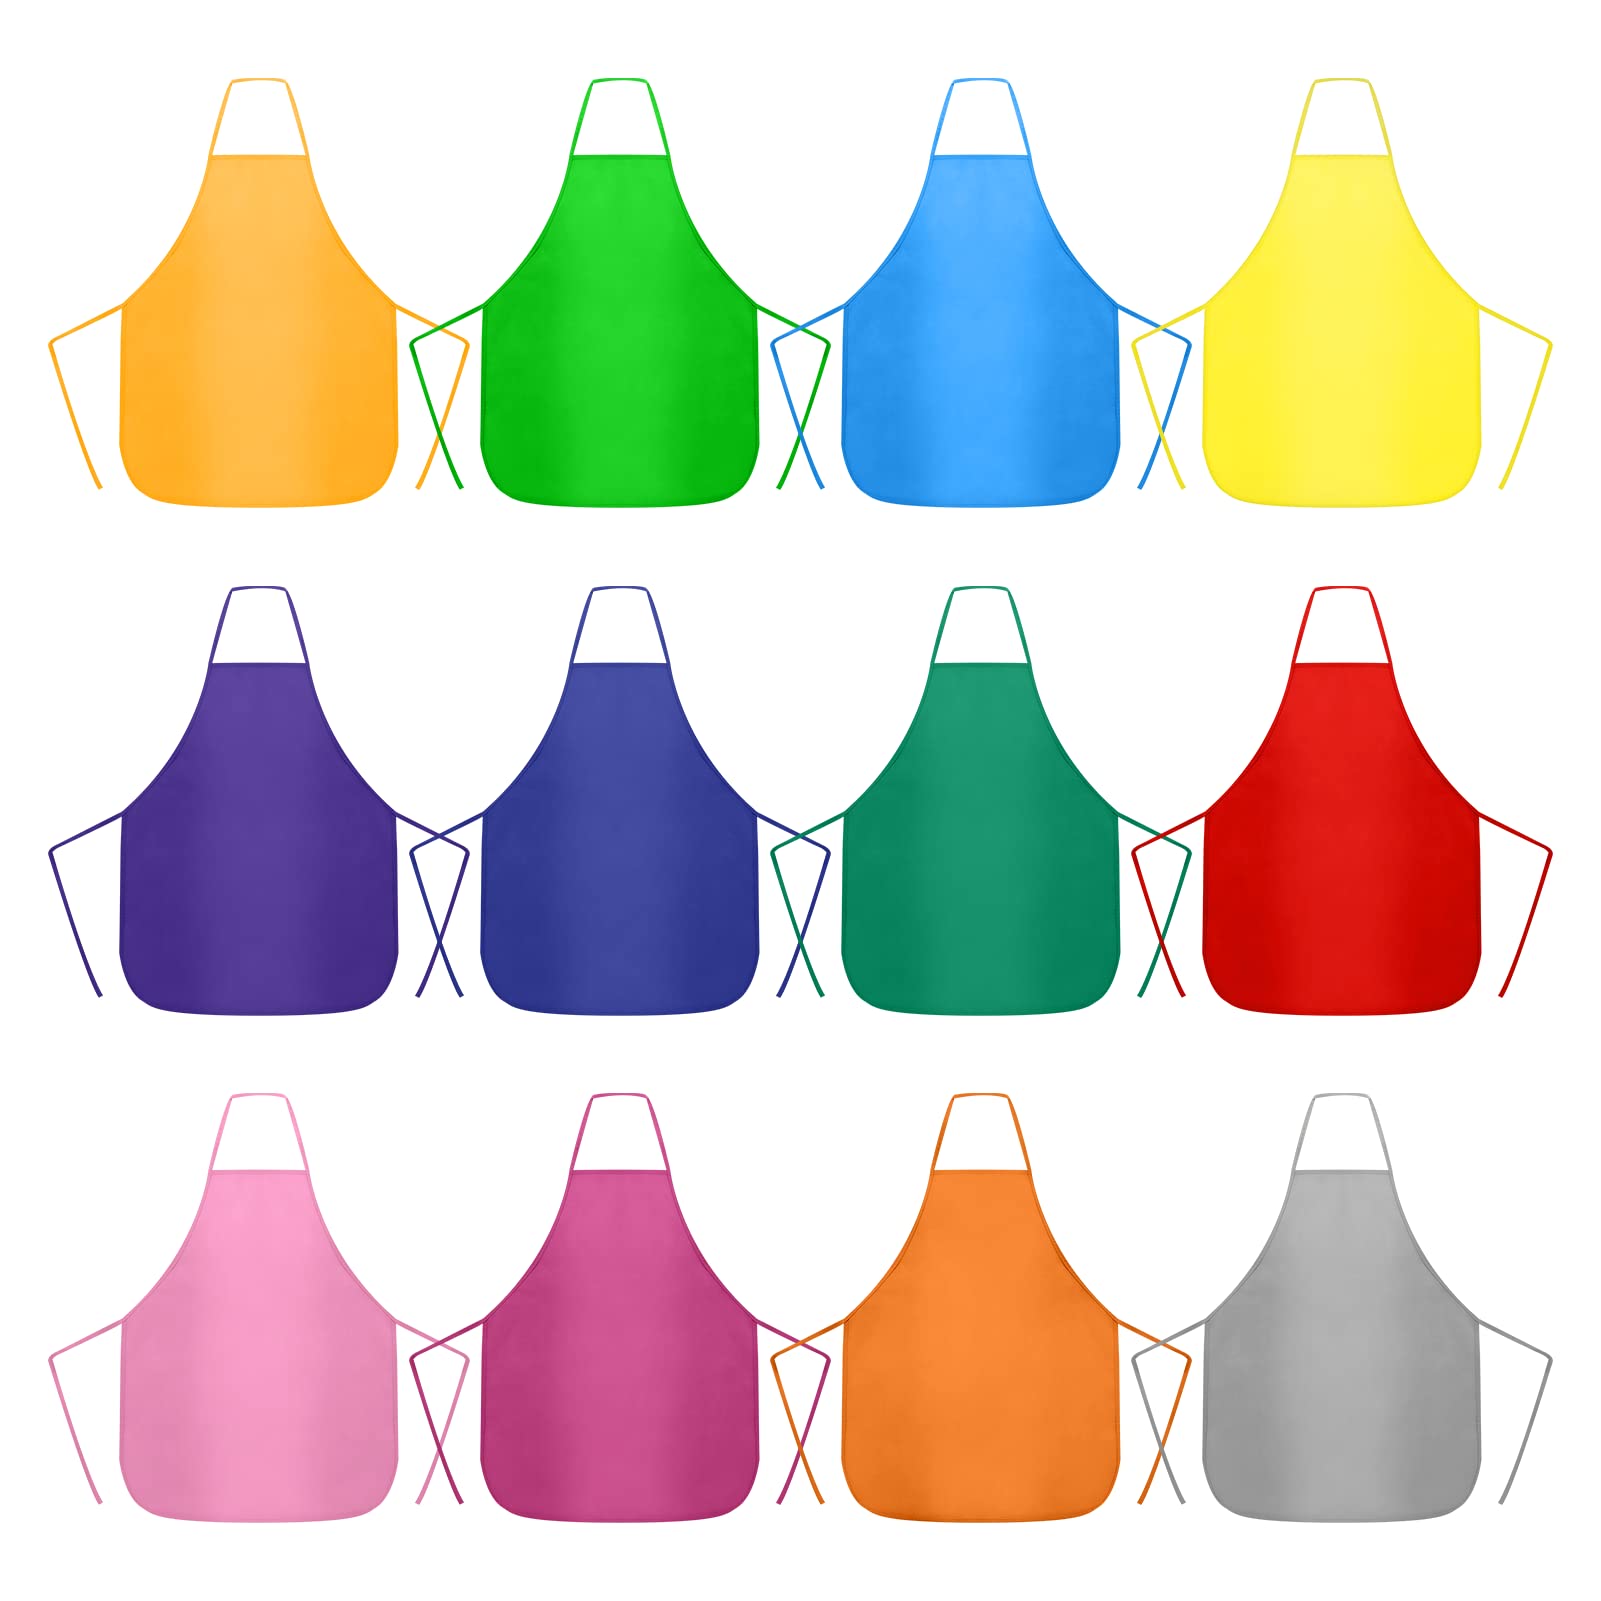 IMERAGO 12 Pcs 12 Colors Kids Aprons Children Art Painting Aprons for Age 3-6 Kitchen Classroom Cooking Baking